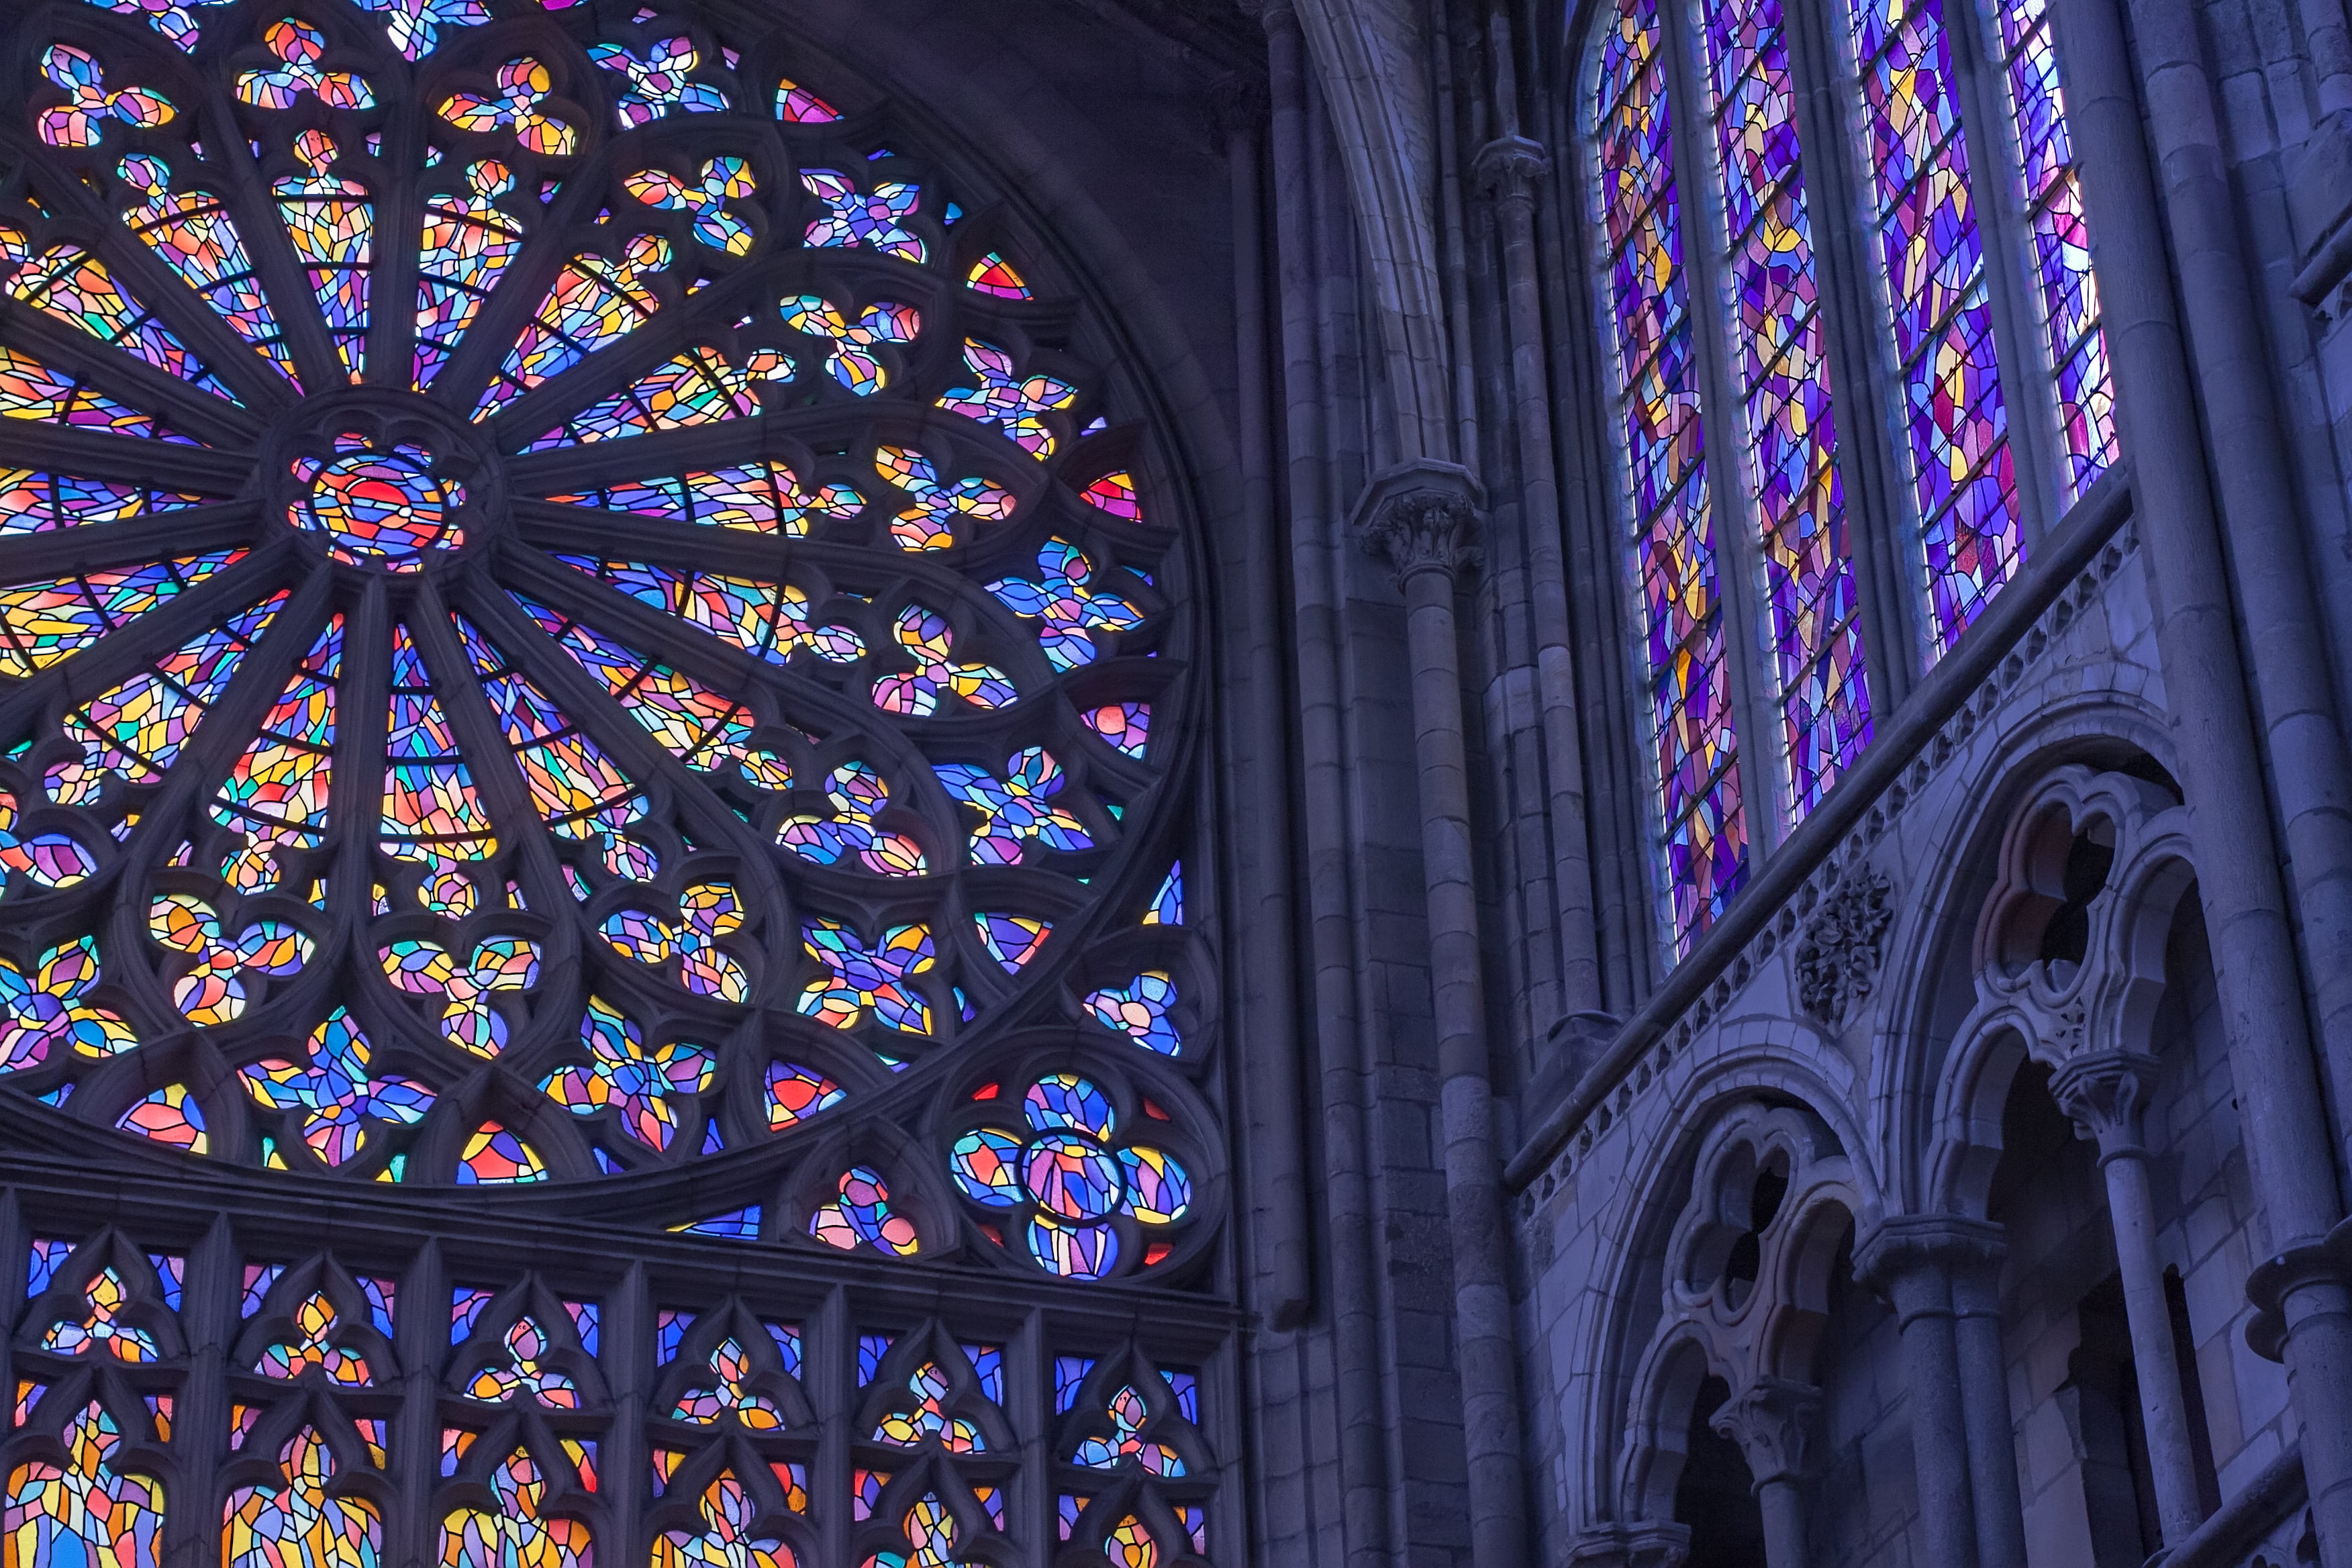 stained glass decor, window, cathedral, architecture, built structure